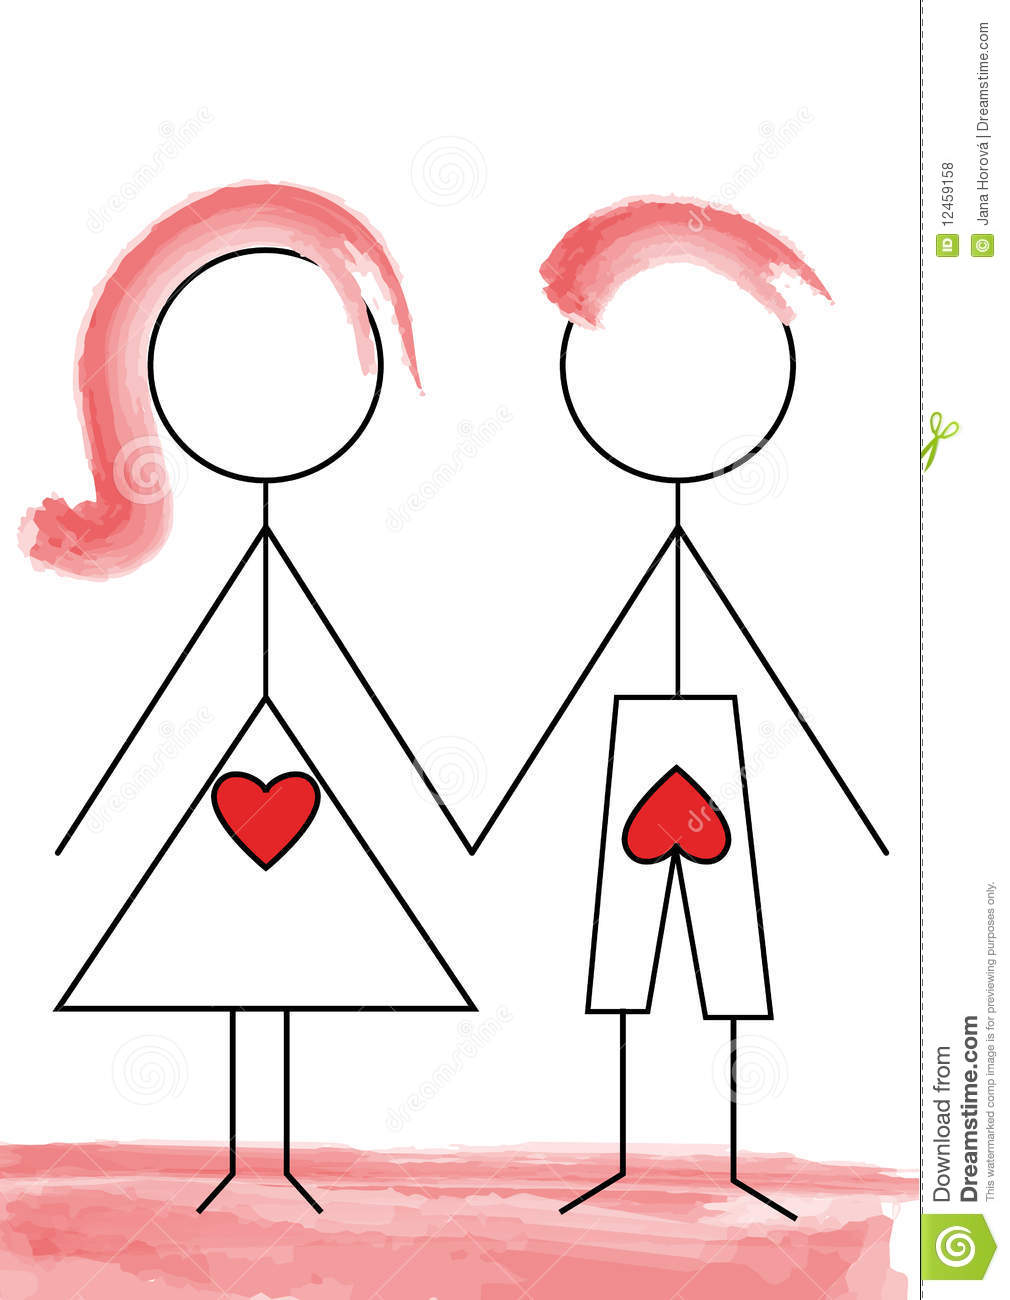 https://clipground.com/images/sexuality-clipart-12.jpg